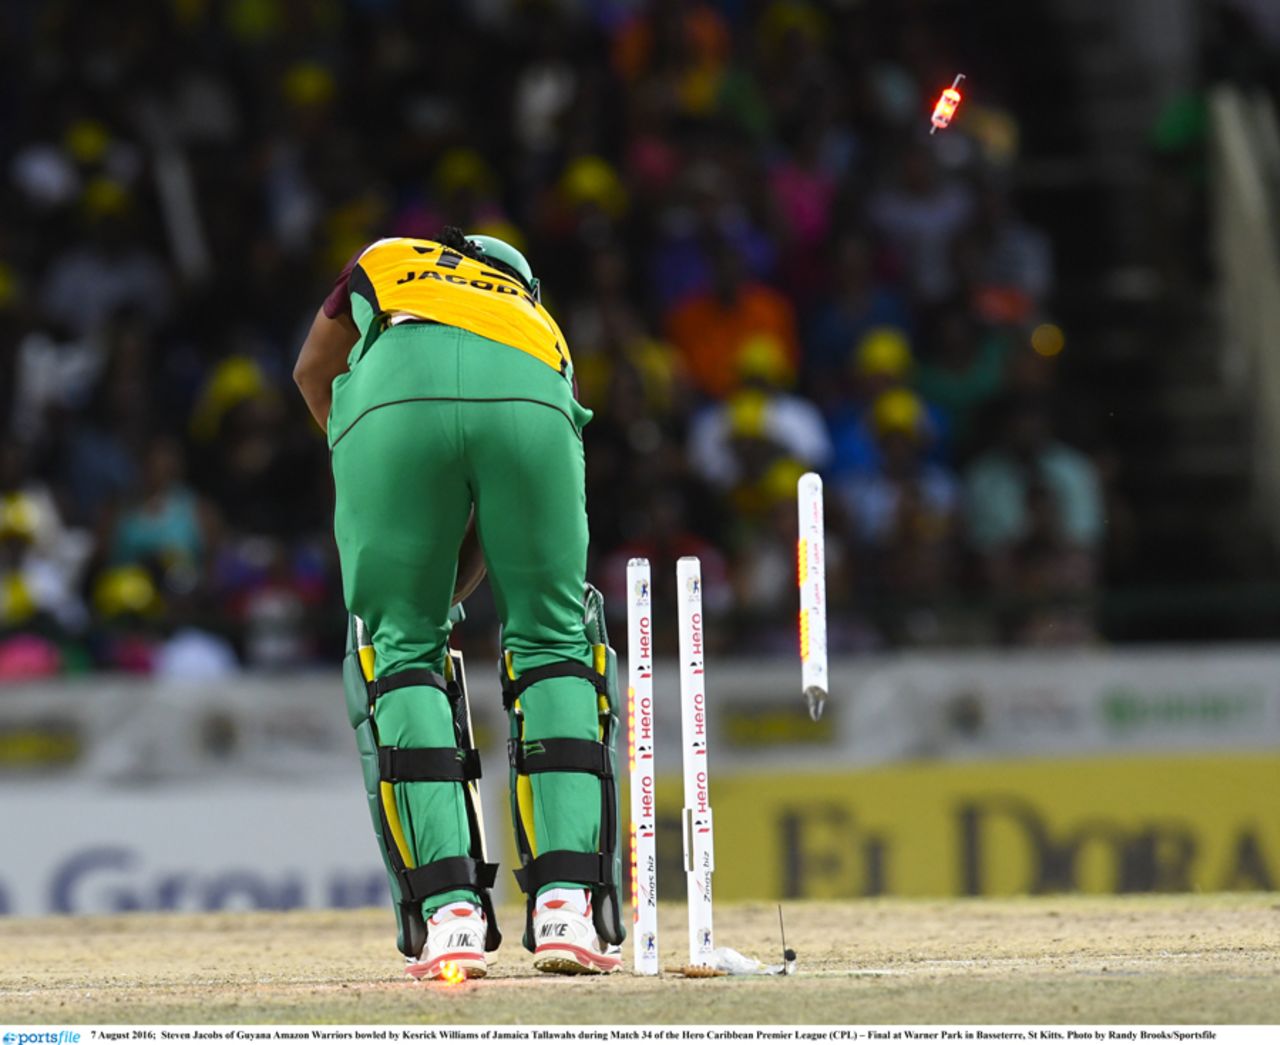 Steven Jacobs loses his off stump, CPL 2016, final, St Kitts, August 7, 2016